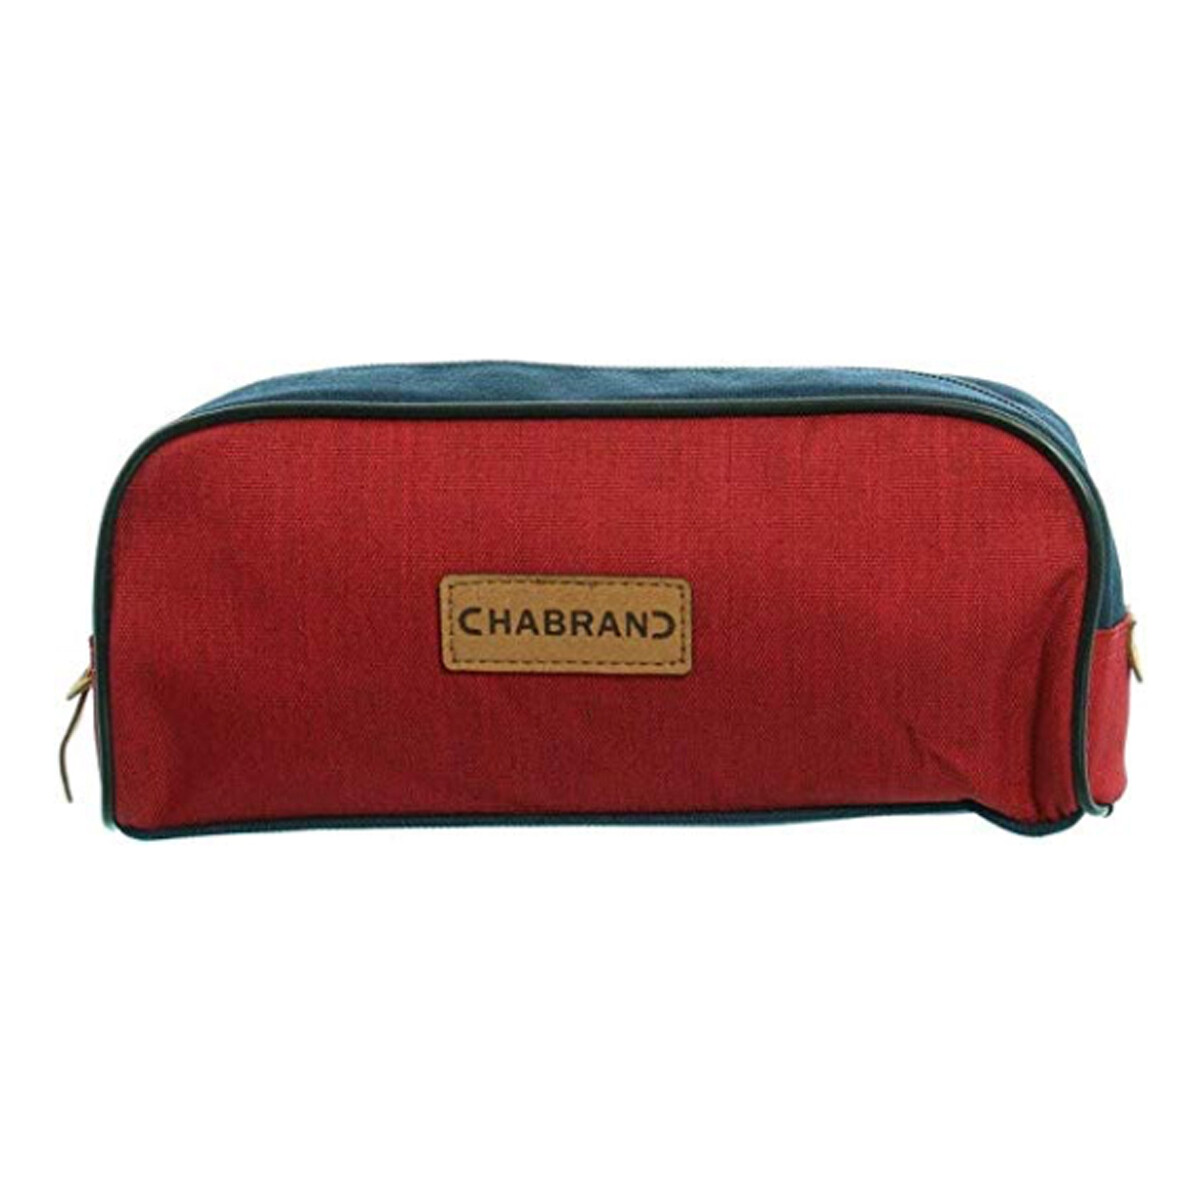 Sacs Trousses Chabrand TROUSSE TEENAGER BI-COLOR MARINE/ROUGE - Rouge